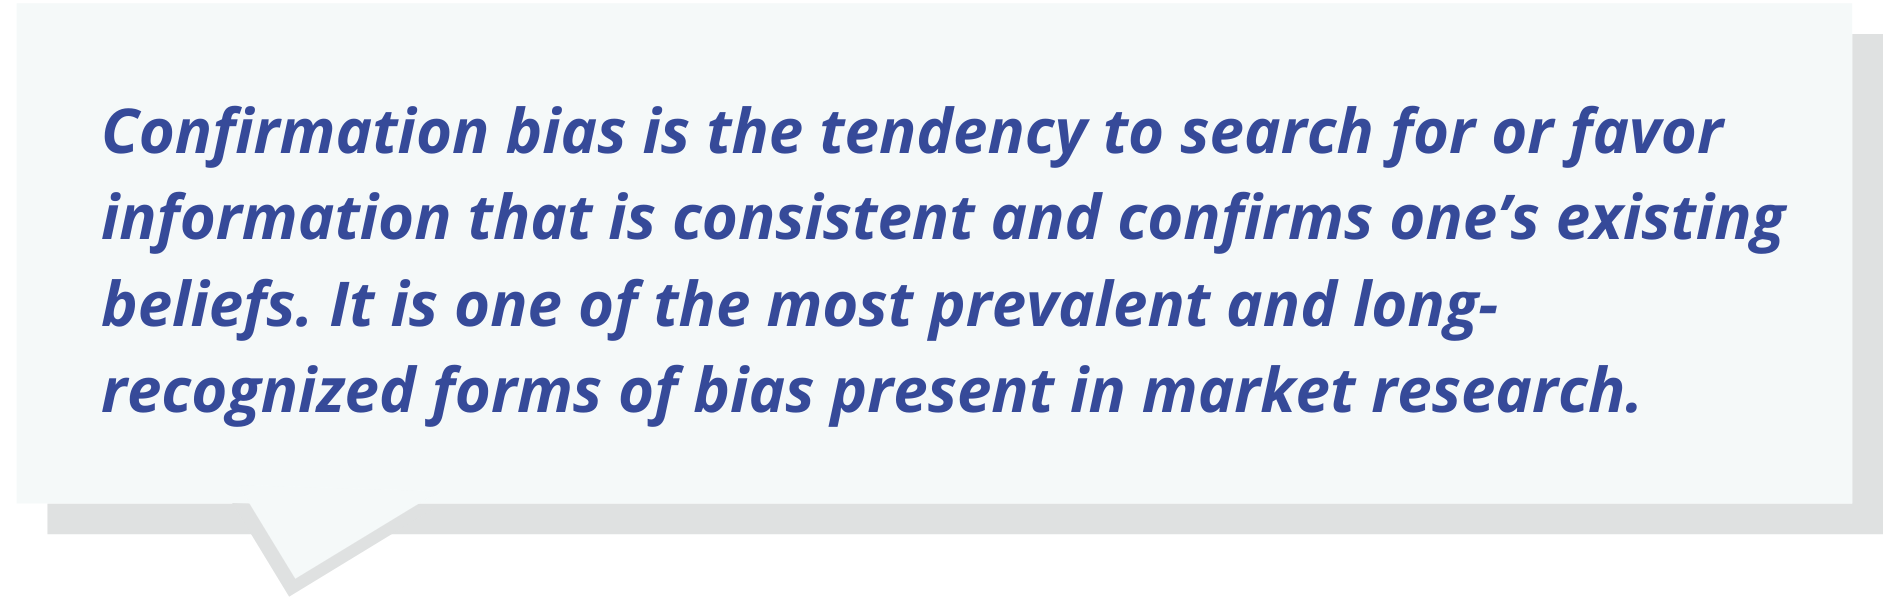 Confirmation bias is the tendency to search for or favor information that is consistent and confirms one’s existing beliefs. It is one of the most prevalent and long-recognized forms of bias present in market research.